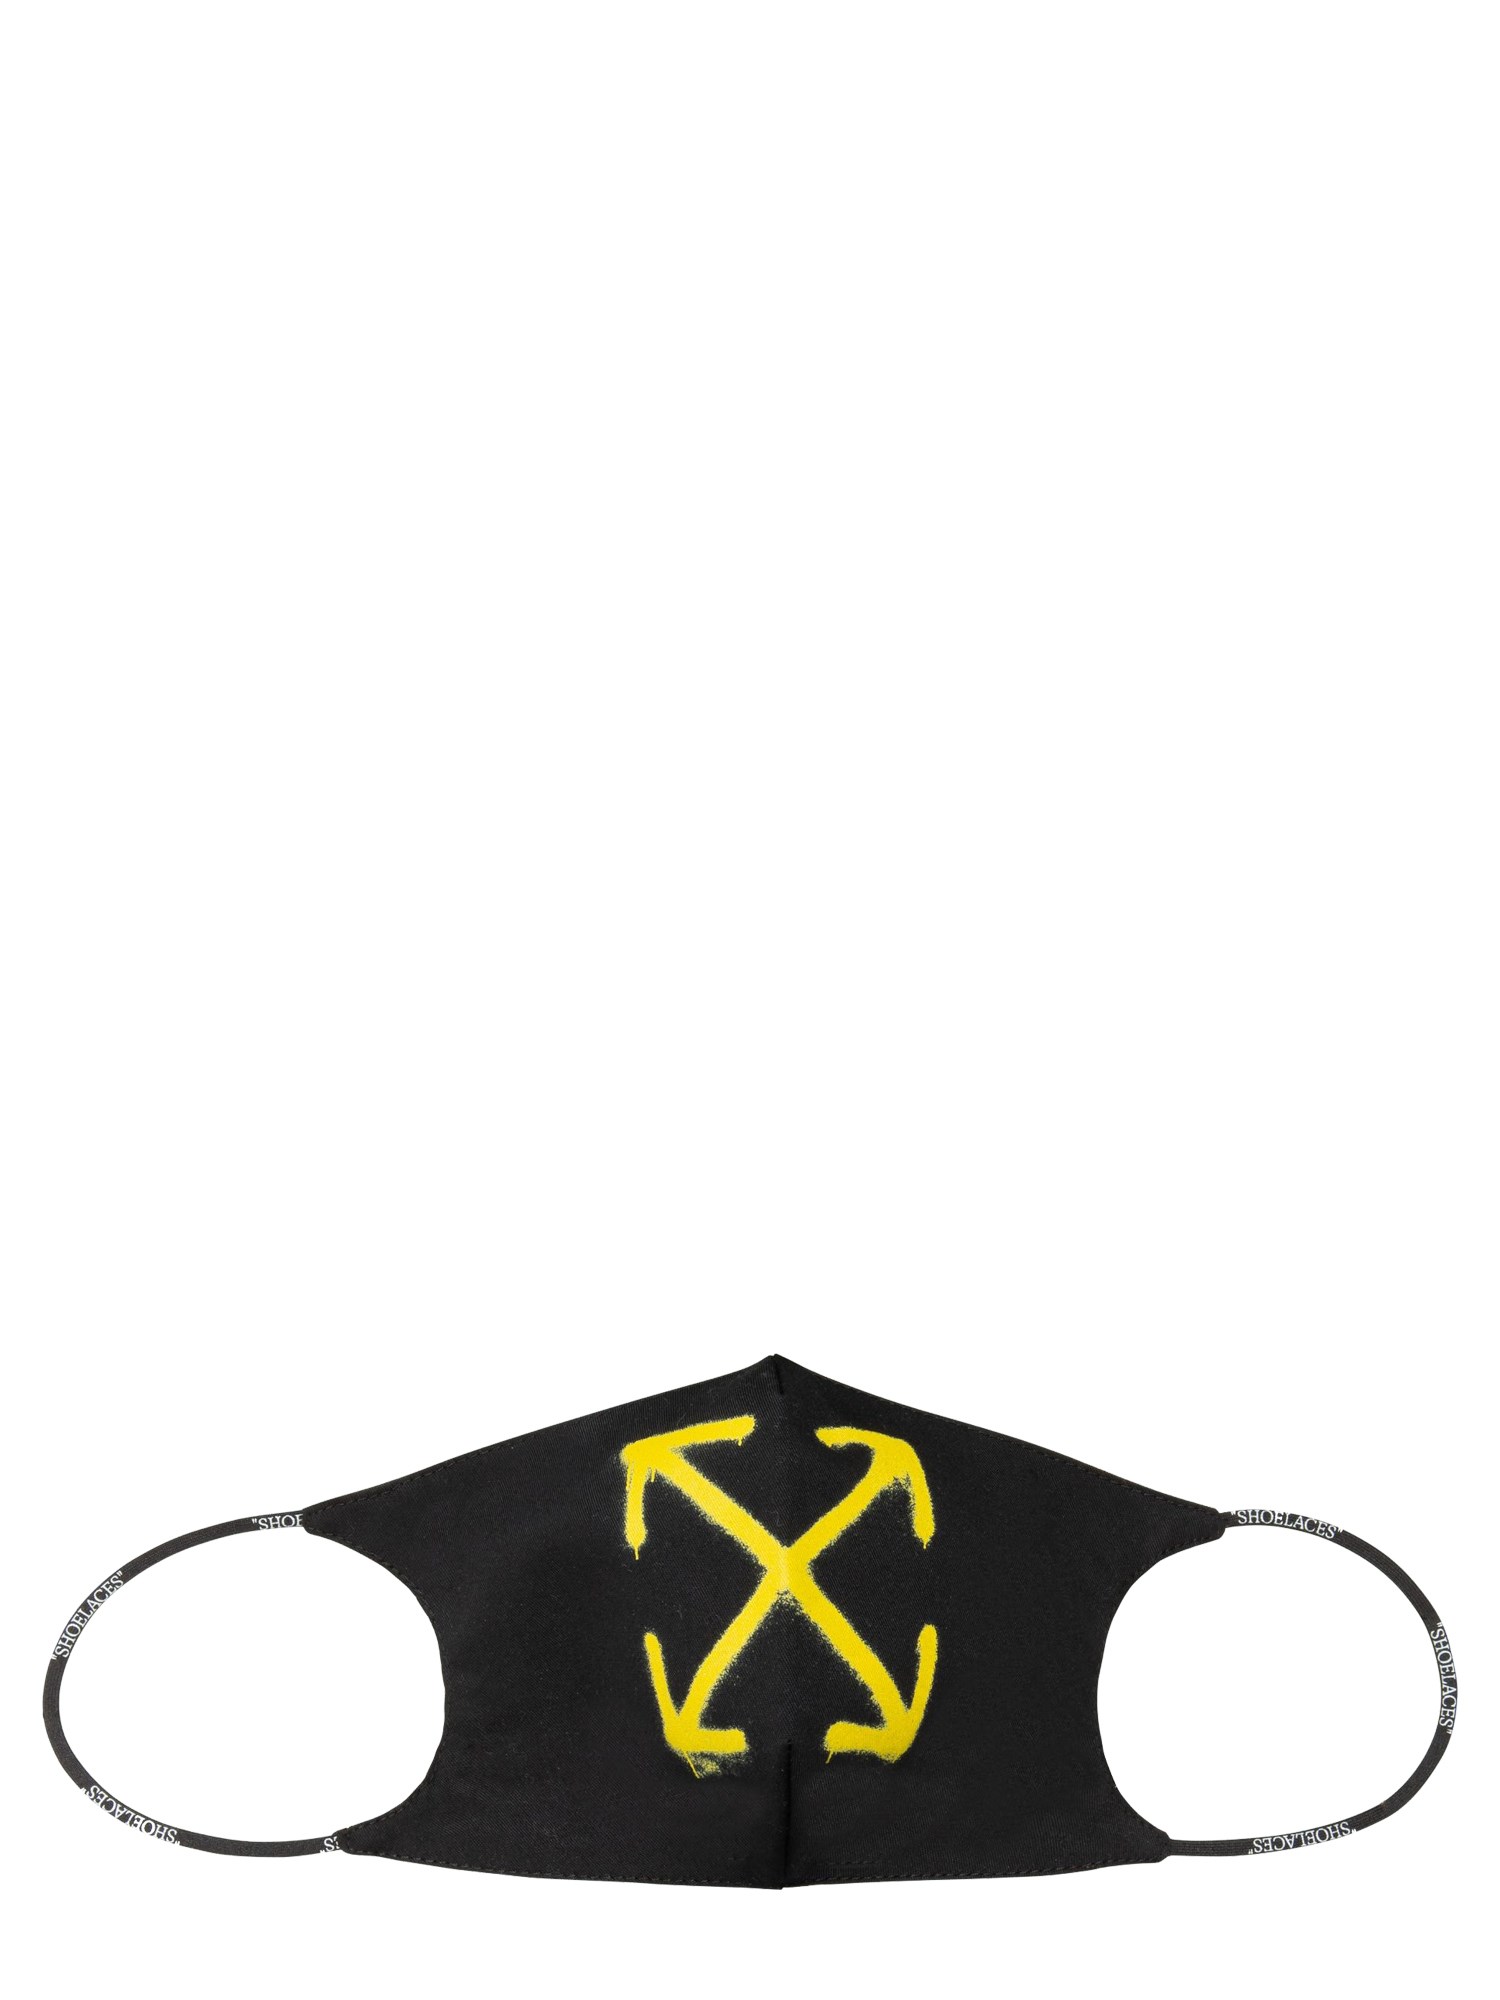 OFF-WHITE off-white mask with logo